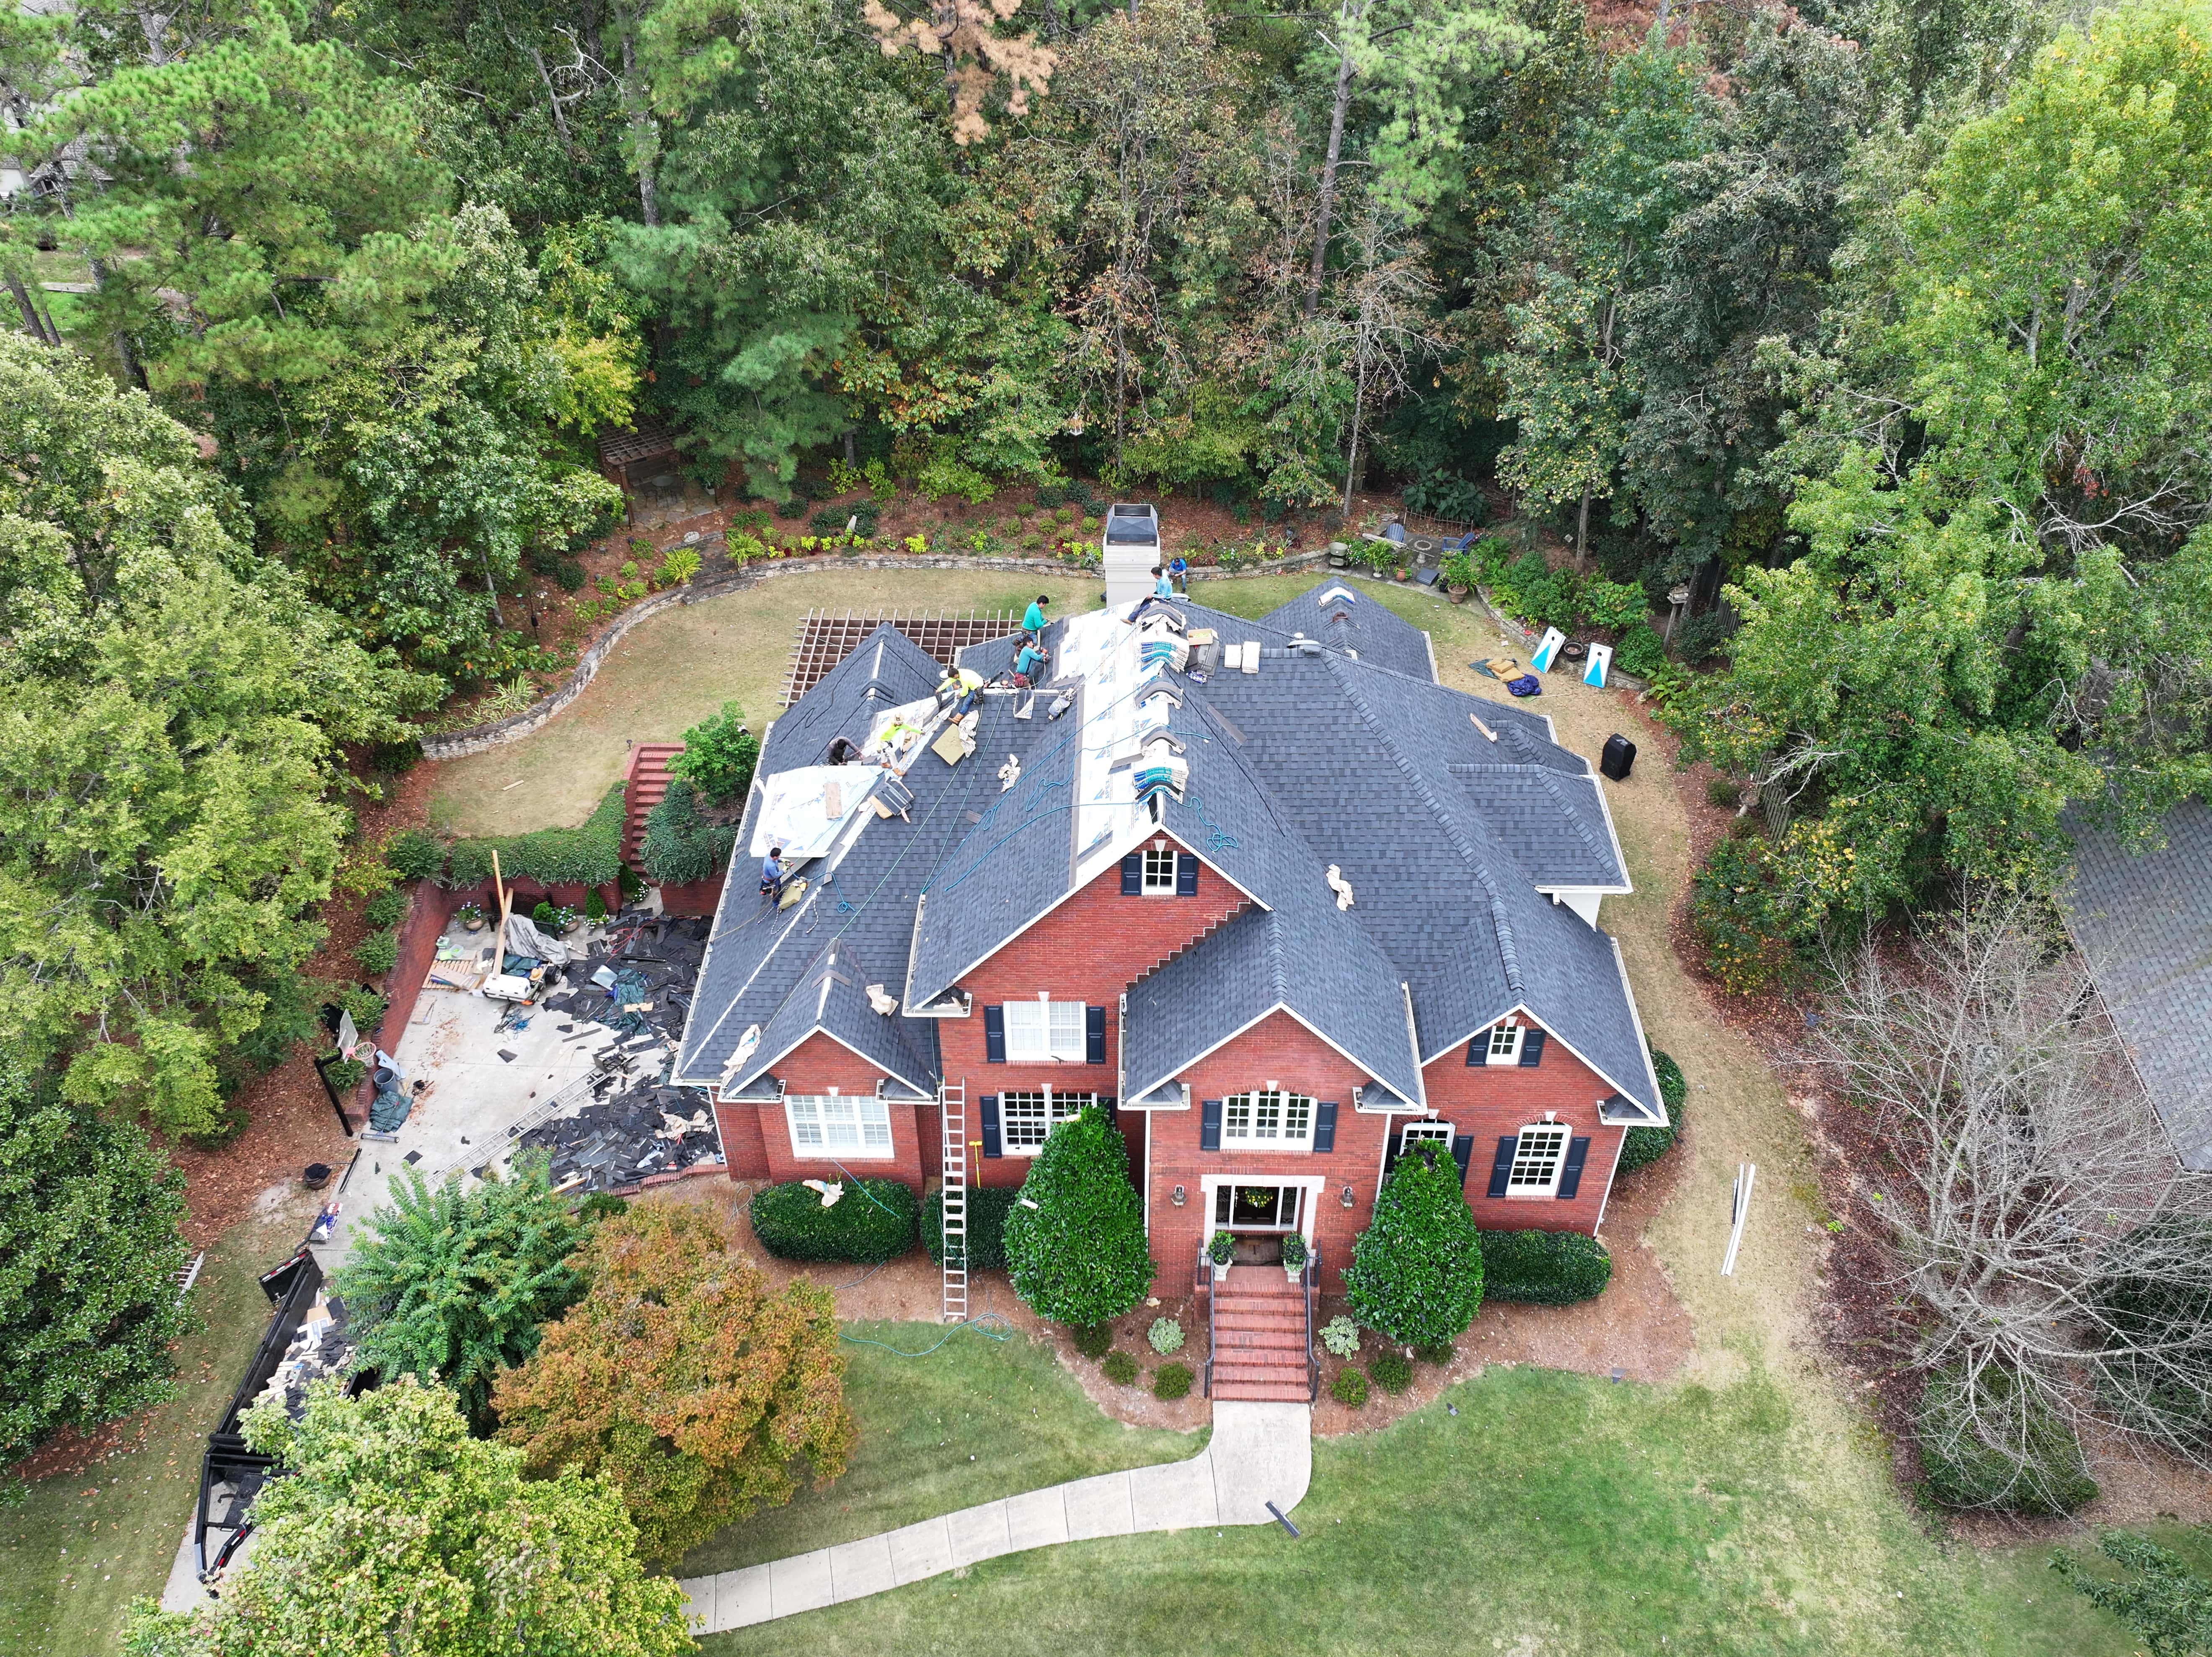 Overhead view of brick house in the middle of a roof install.